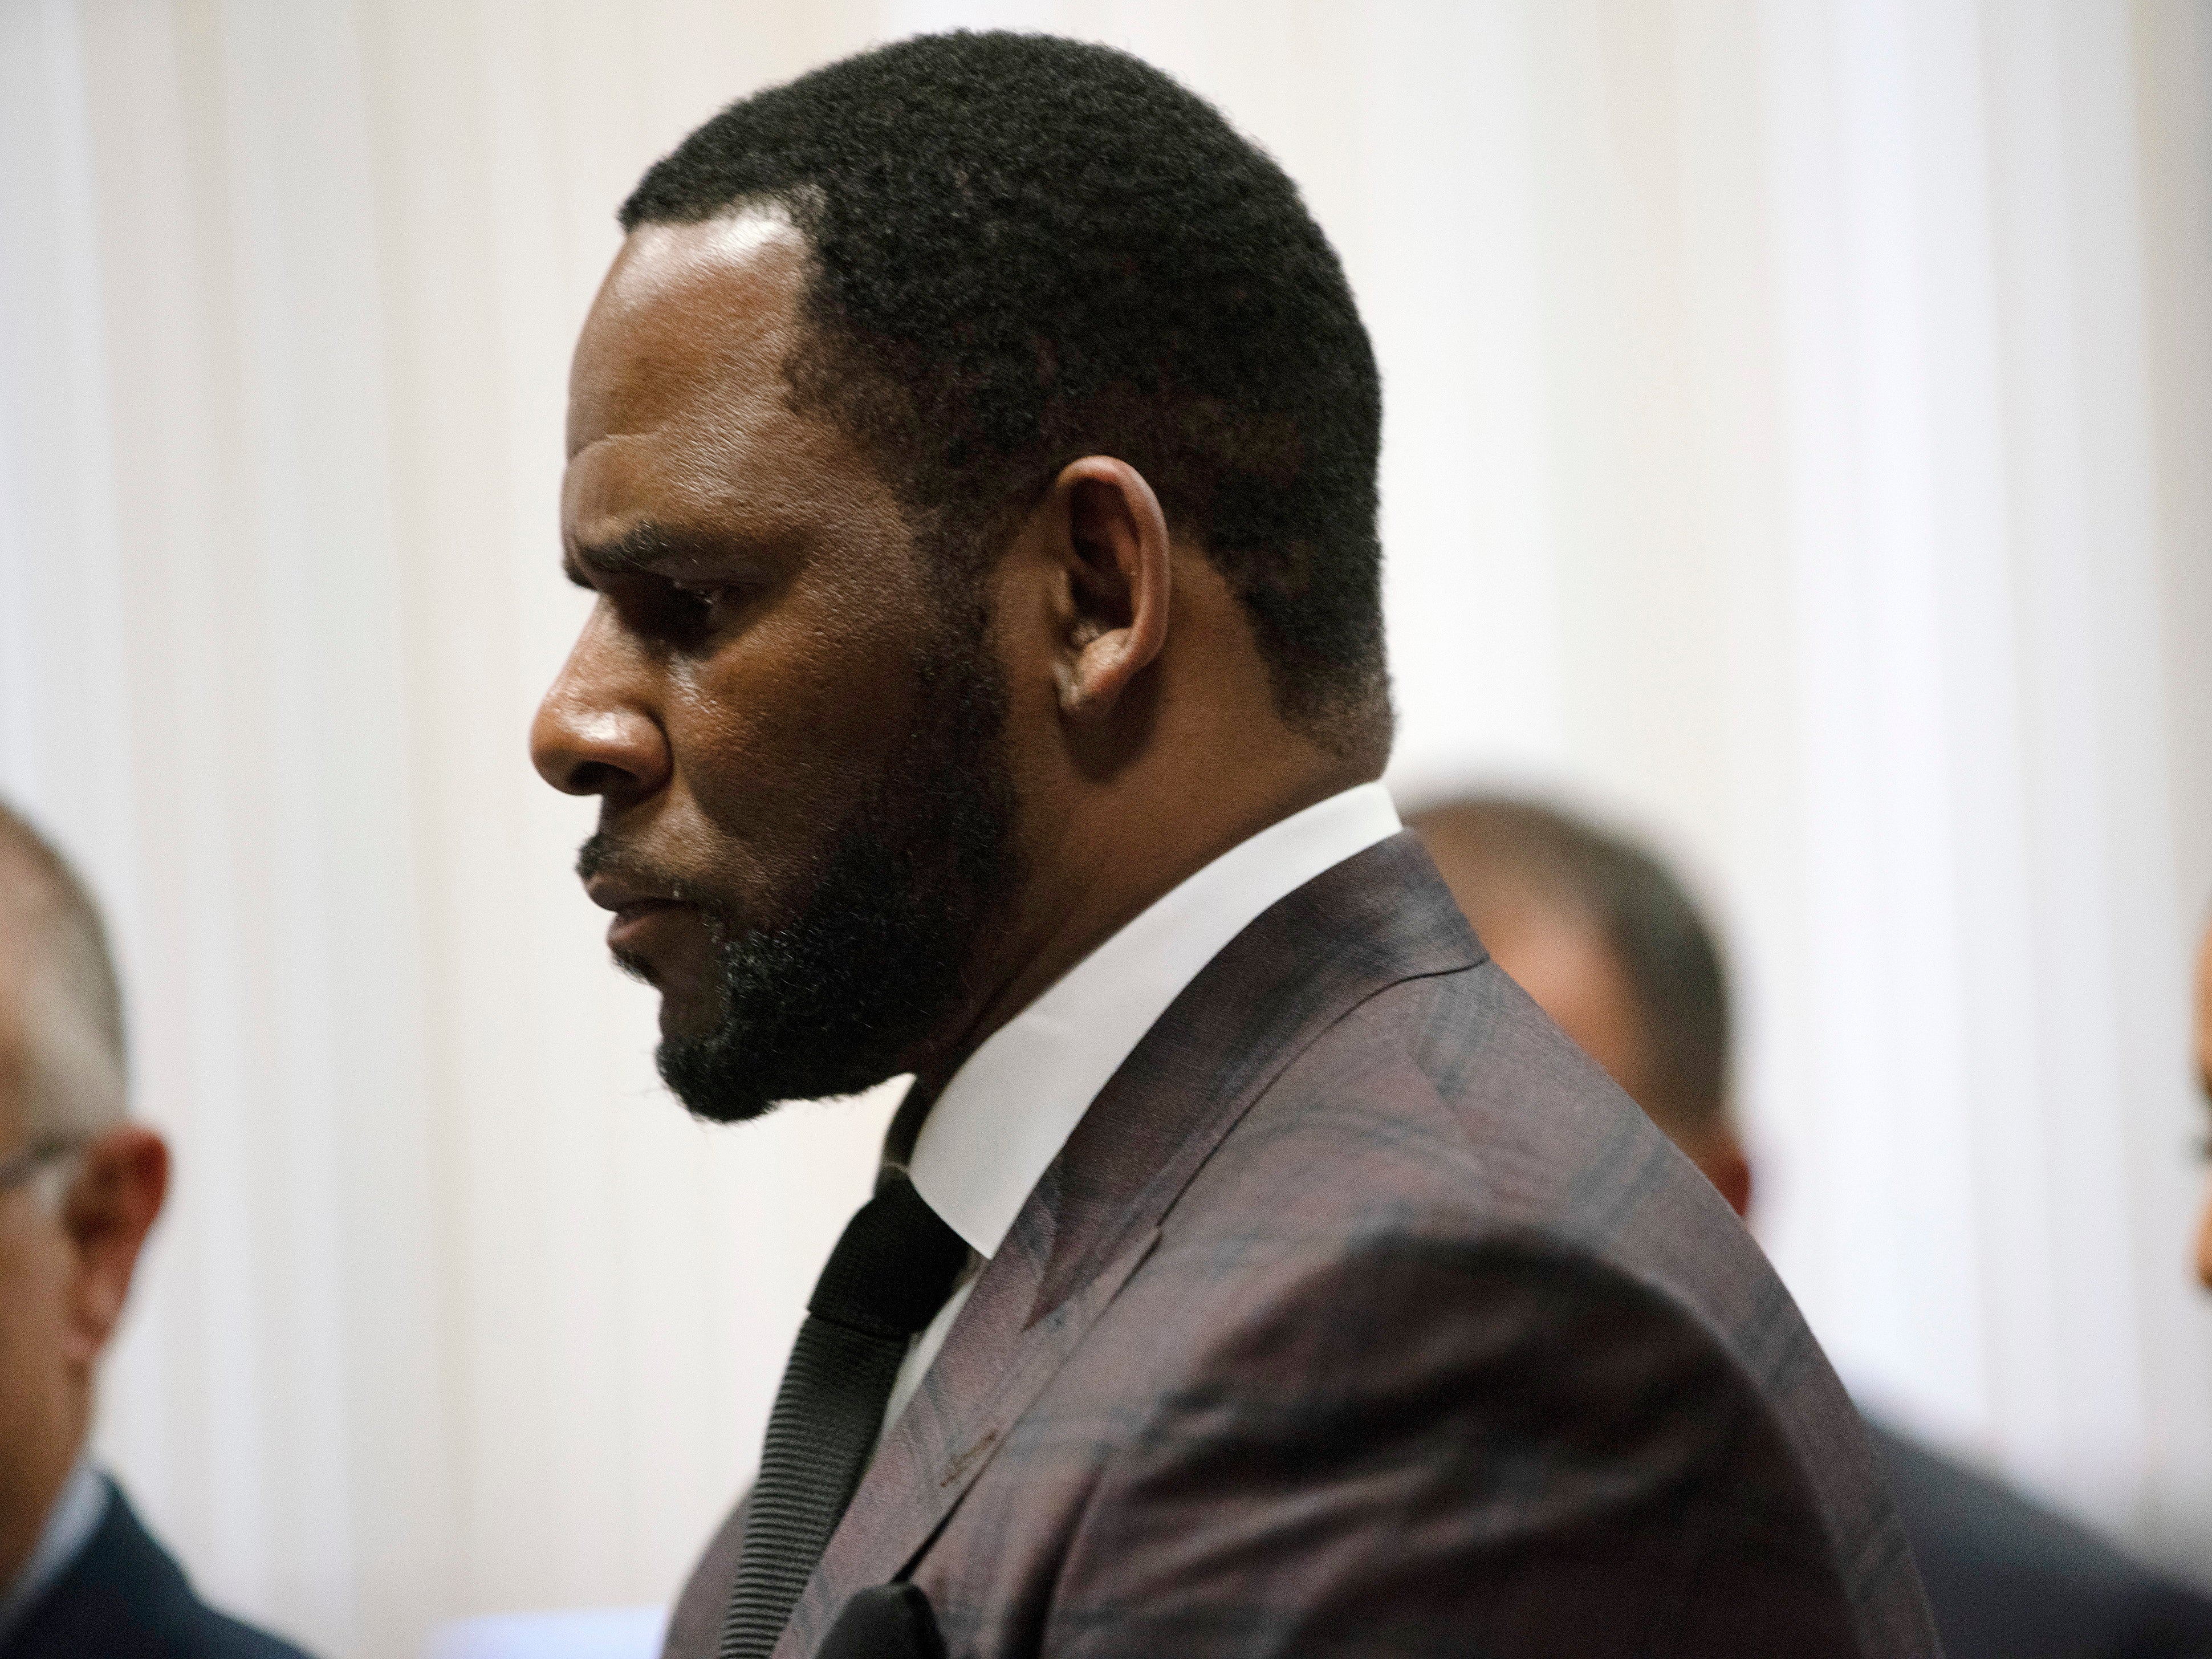 R Kelly appears at a hearing on 26 June 2019 in Chicago, Illinois